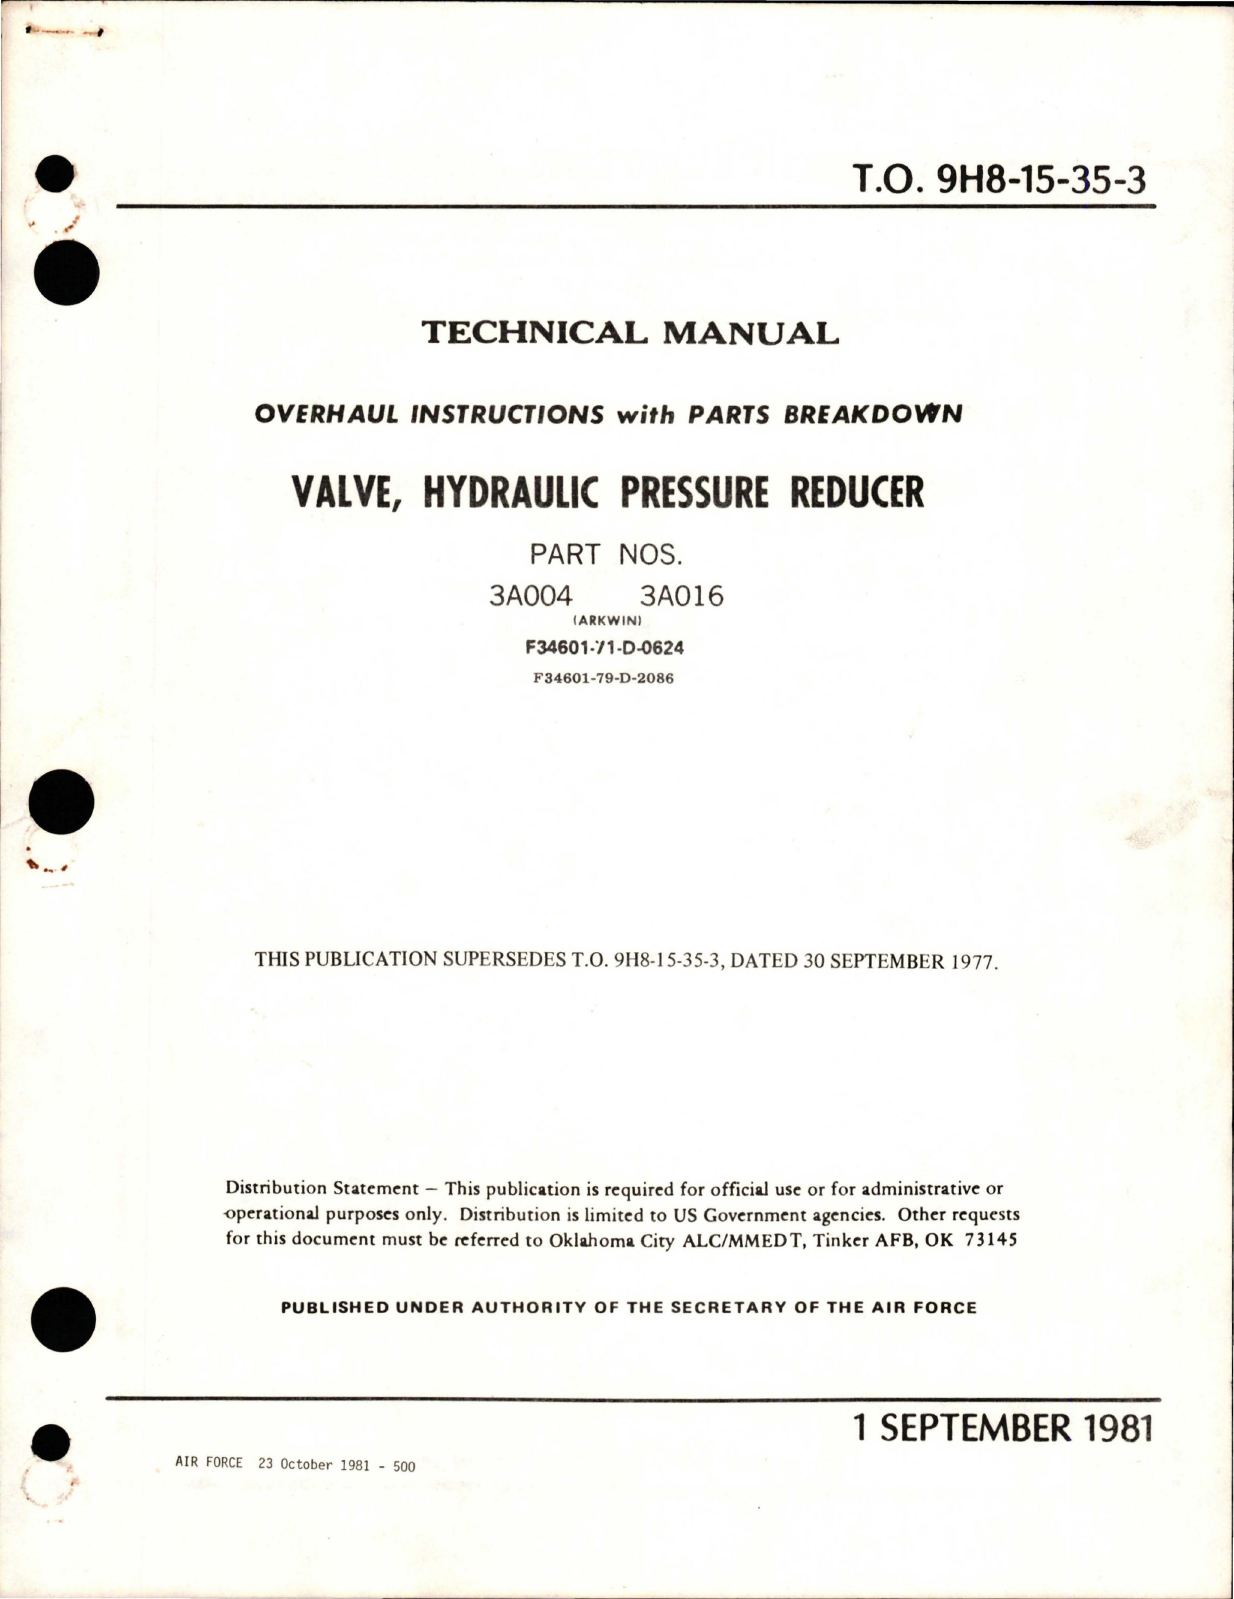 Sample page 1 from AirCorps Library document: Overhaul Instructions with Parts Breakdown for Hydraulic Pressure Reducer Valve - Parts 3A004 and 3A016